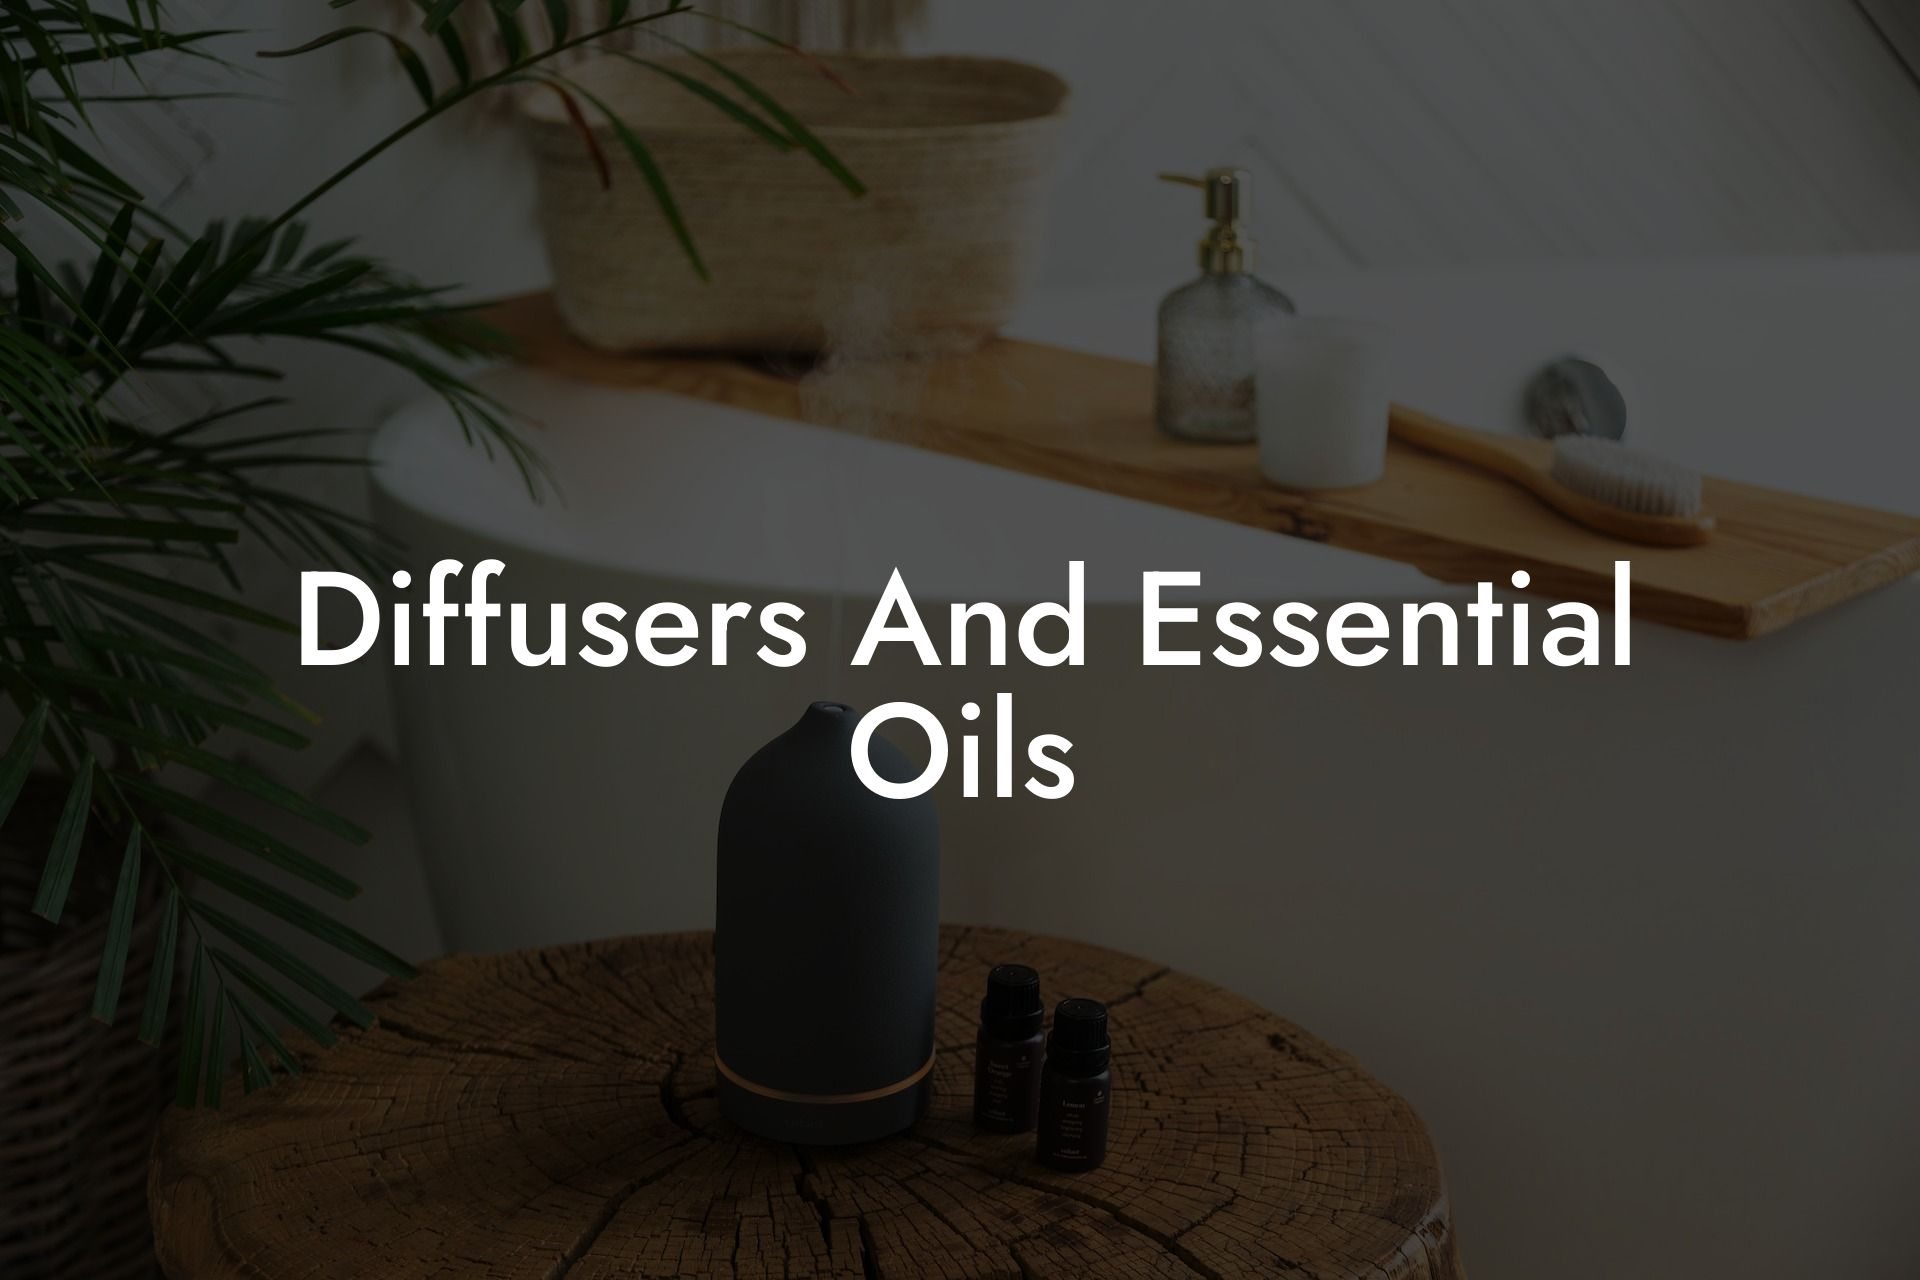 Diffusers And Essential Oils